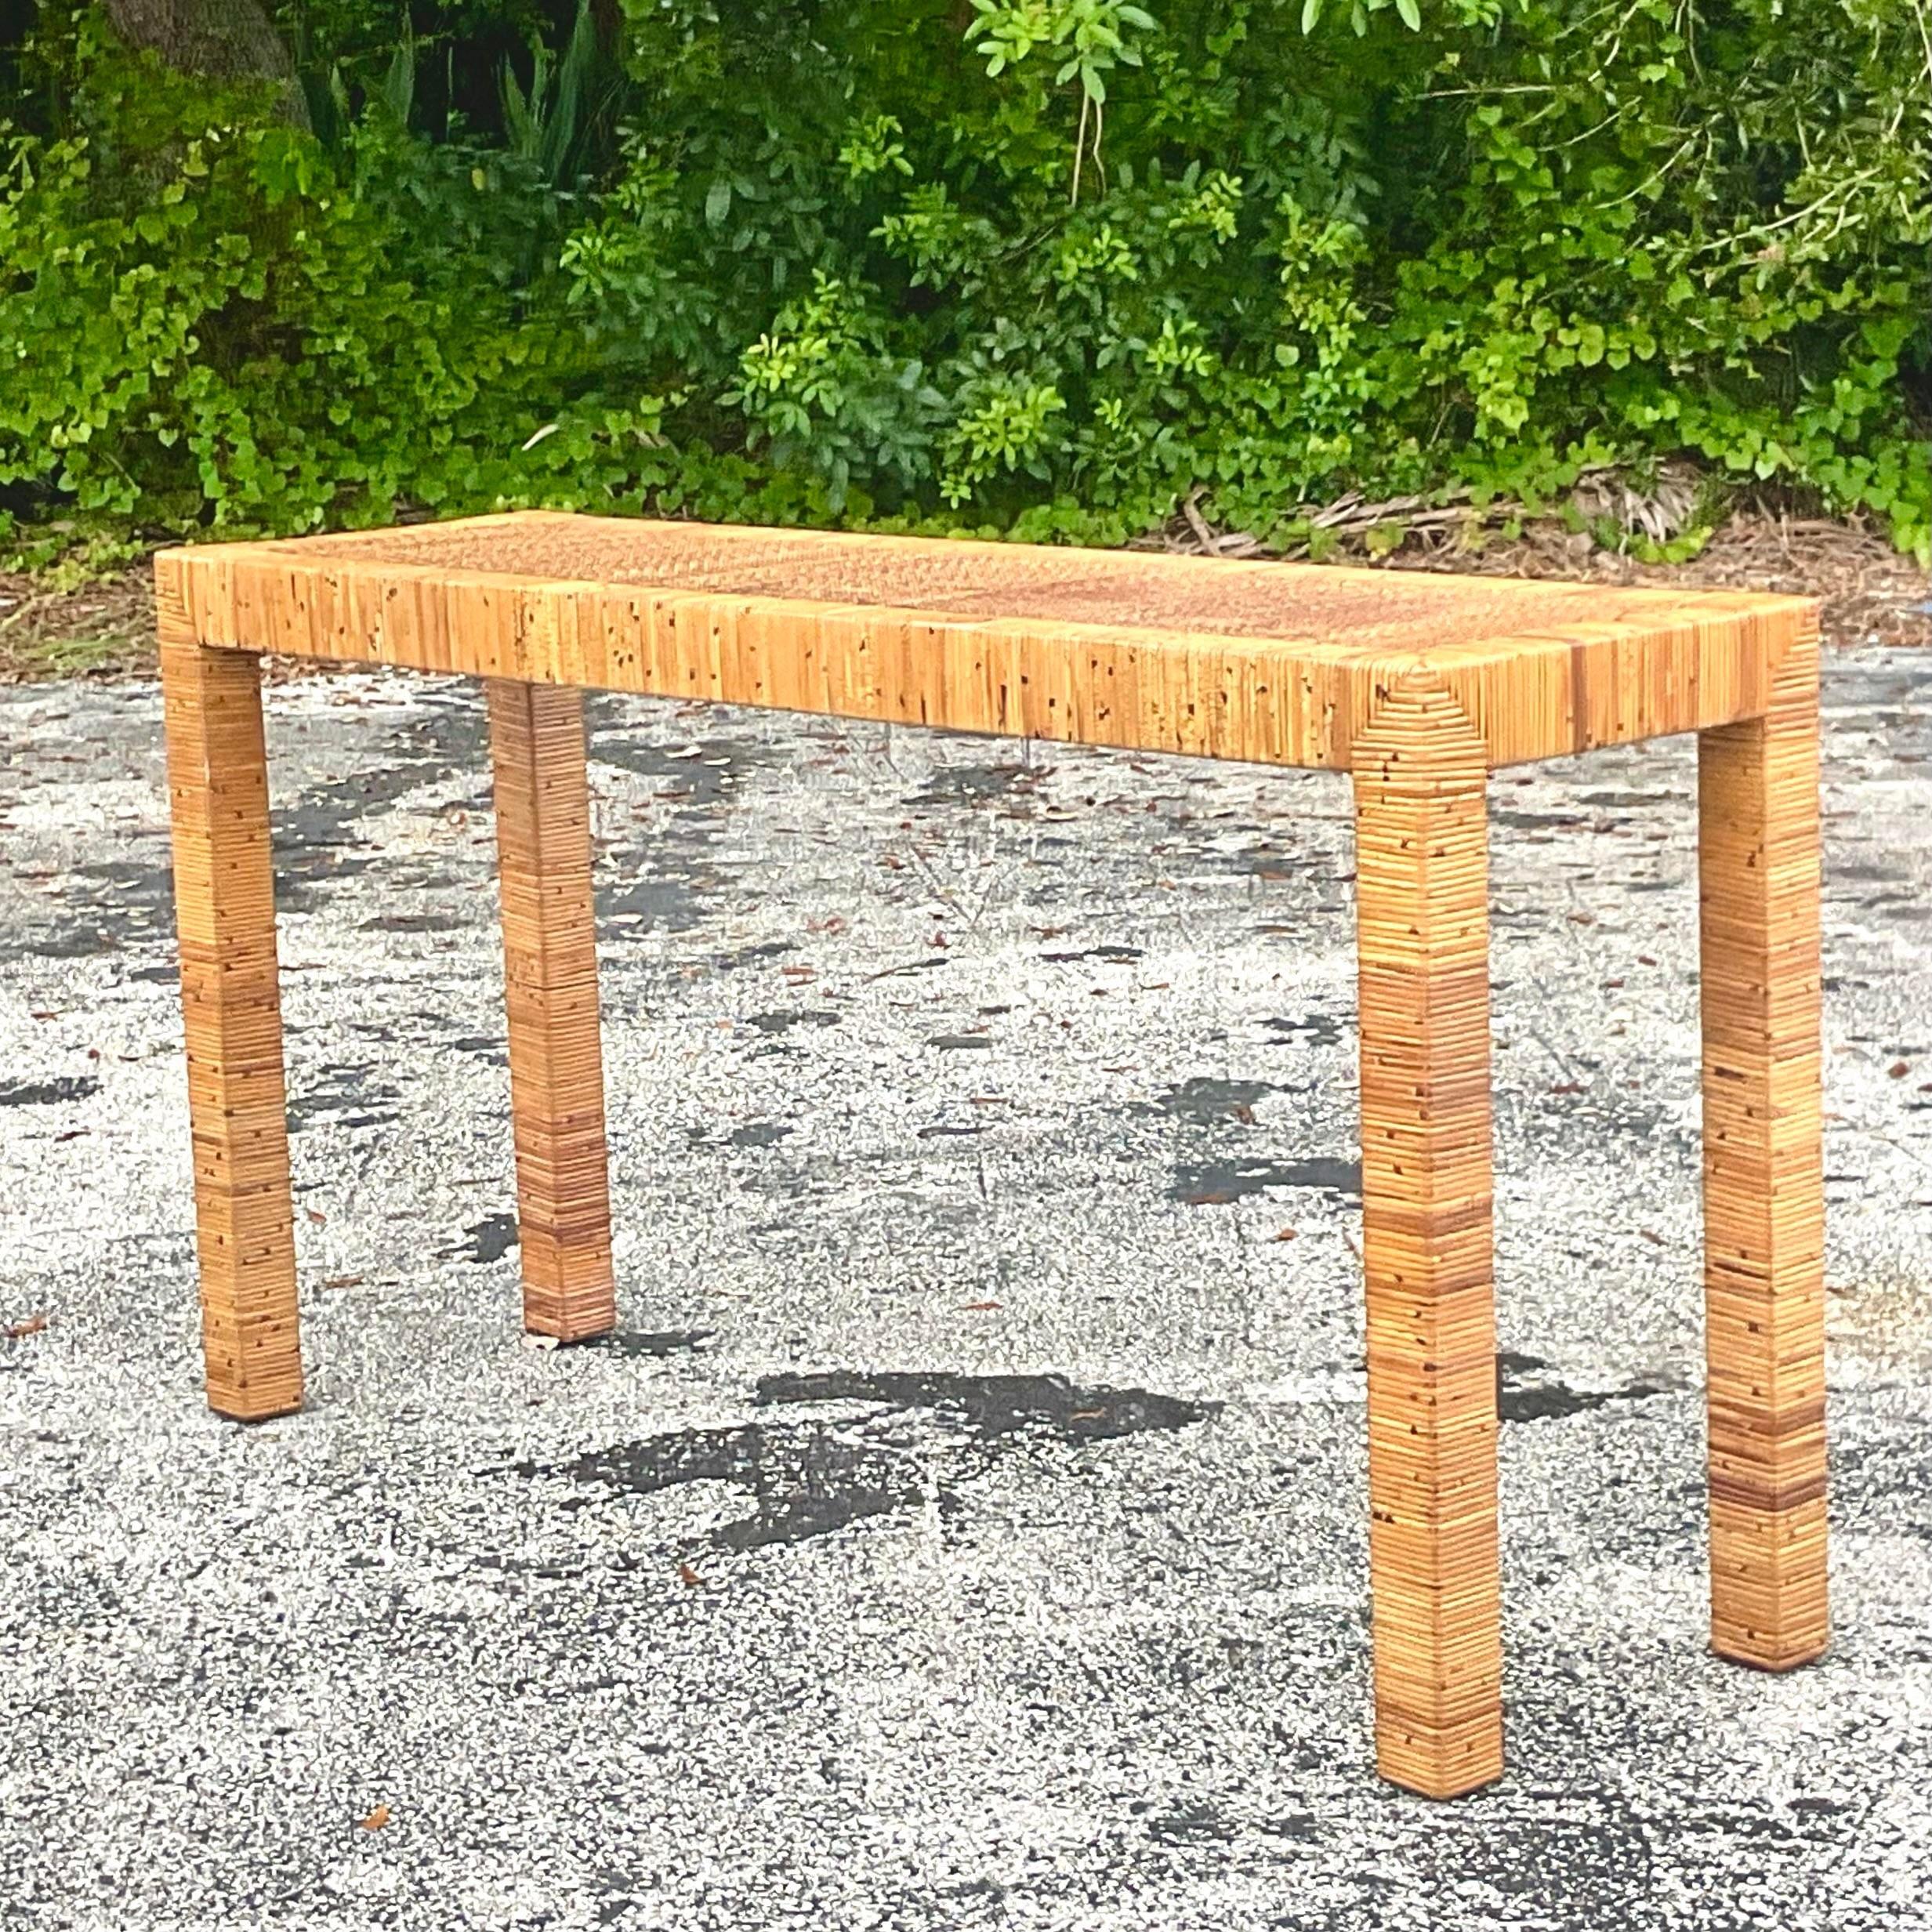 A fabulous vintage Coastal console table. A chic wrapped rattan in a classic parsons shape. Inset woven rattan top panel. Acquired from a Palm Beach estate.